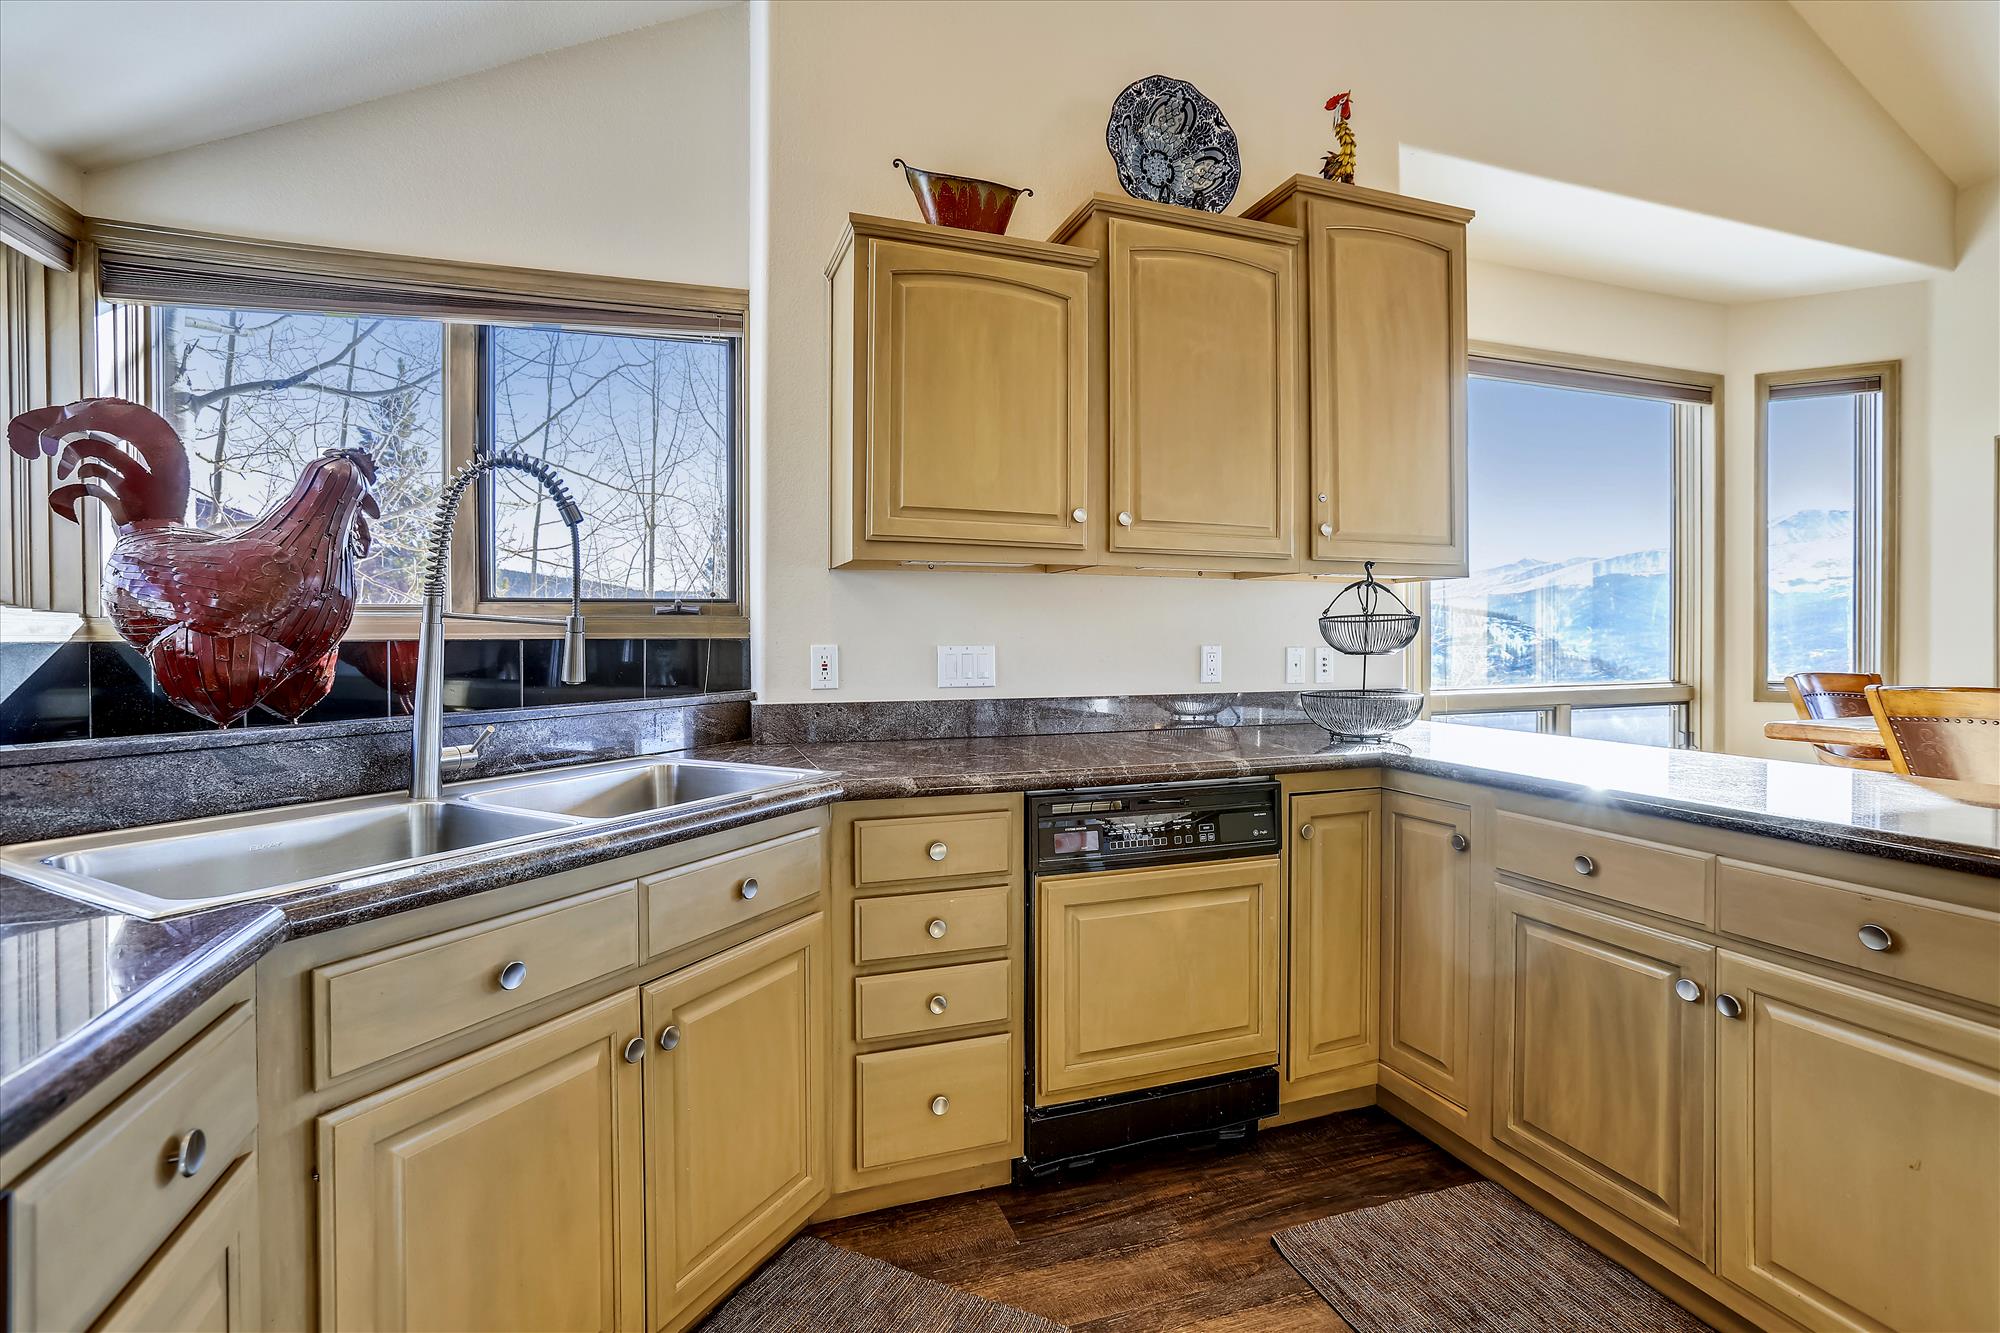 The large kitchen is perfect for cooking meals for your group.